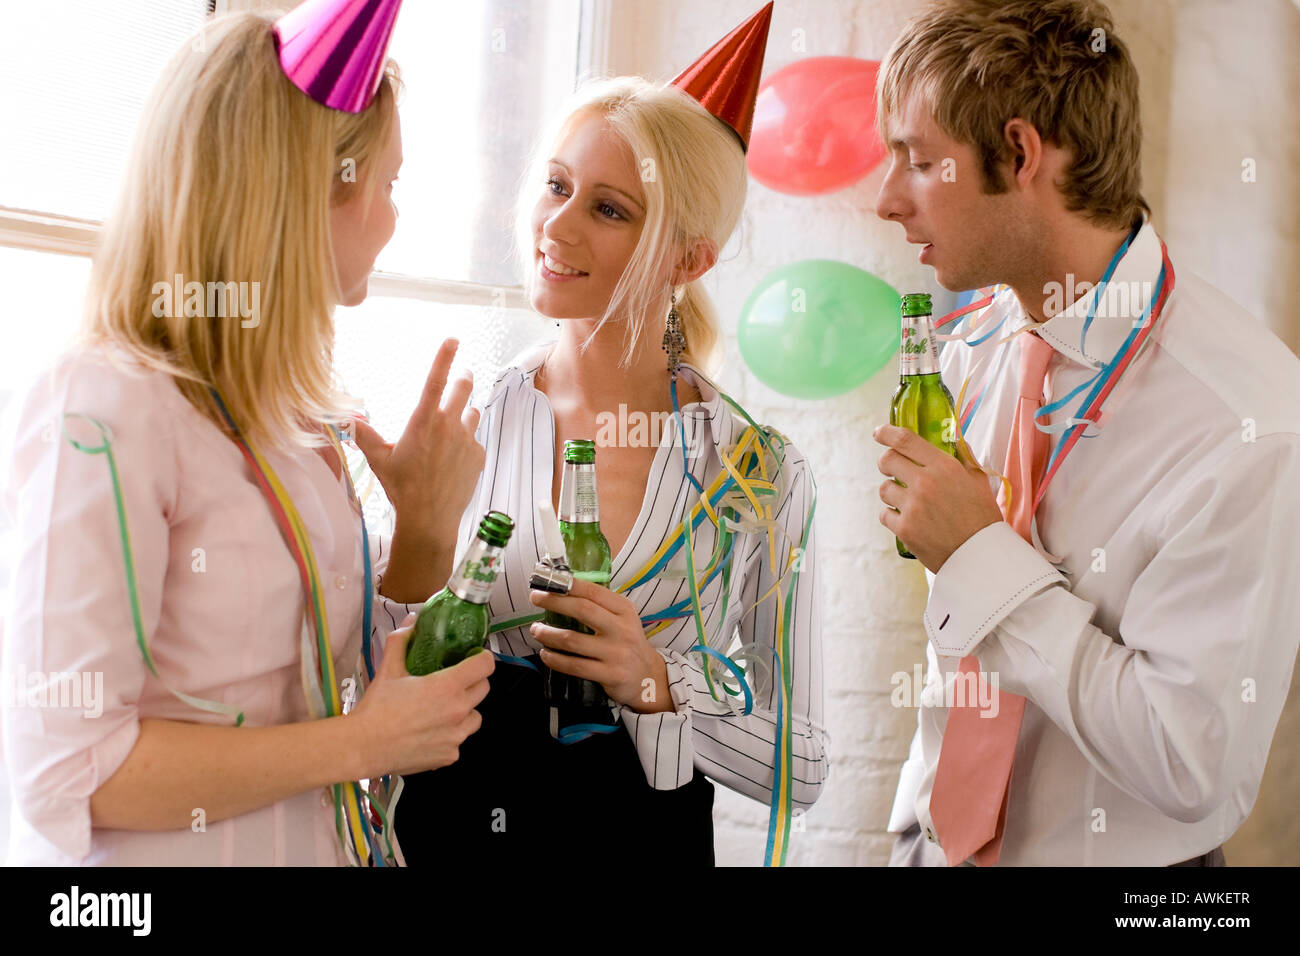 group of people drinking at an office party Stock Photo